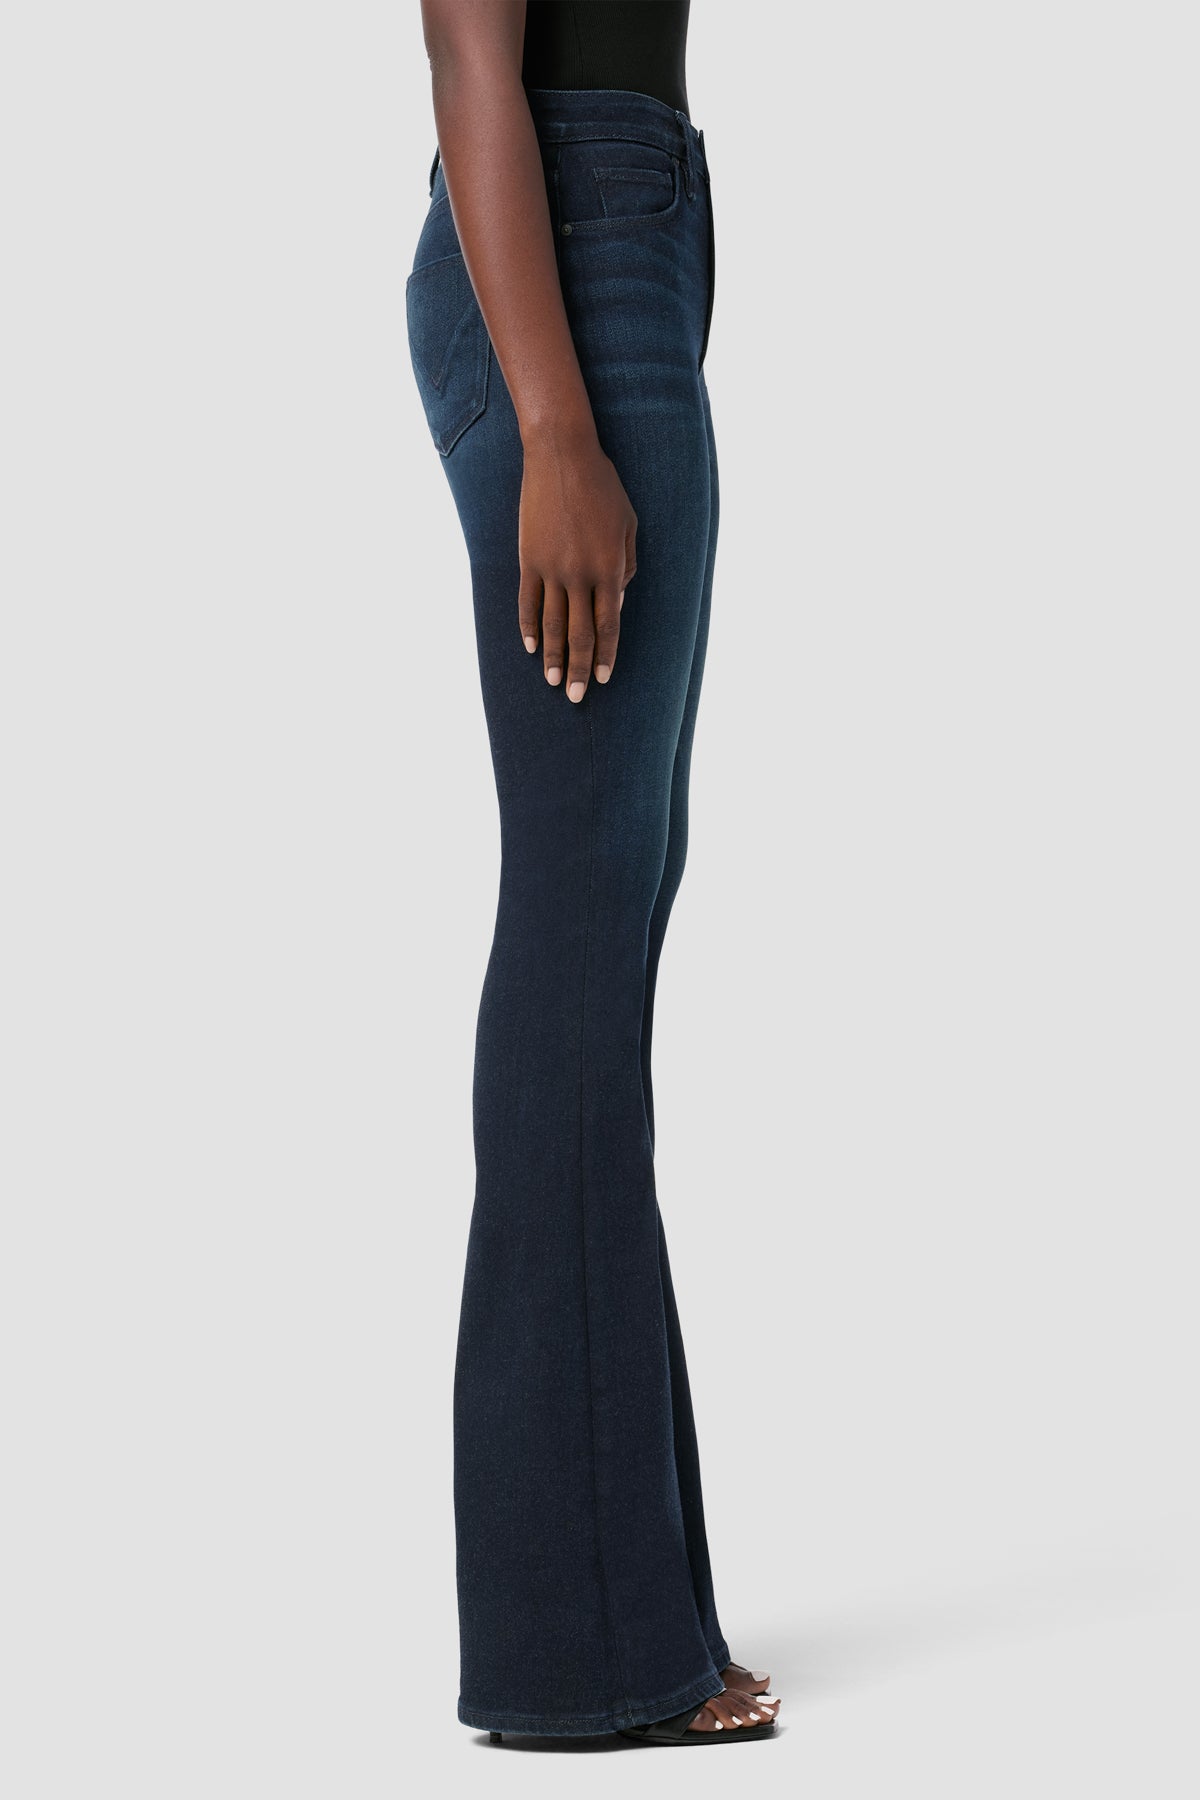 Spanx Flare Jeans - Midnight Shade – Lulubelles Boutique